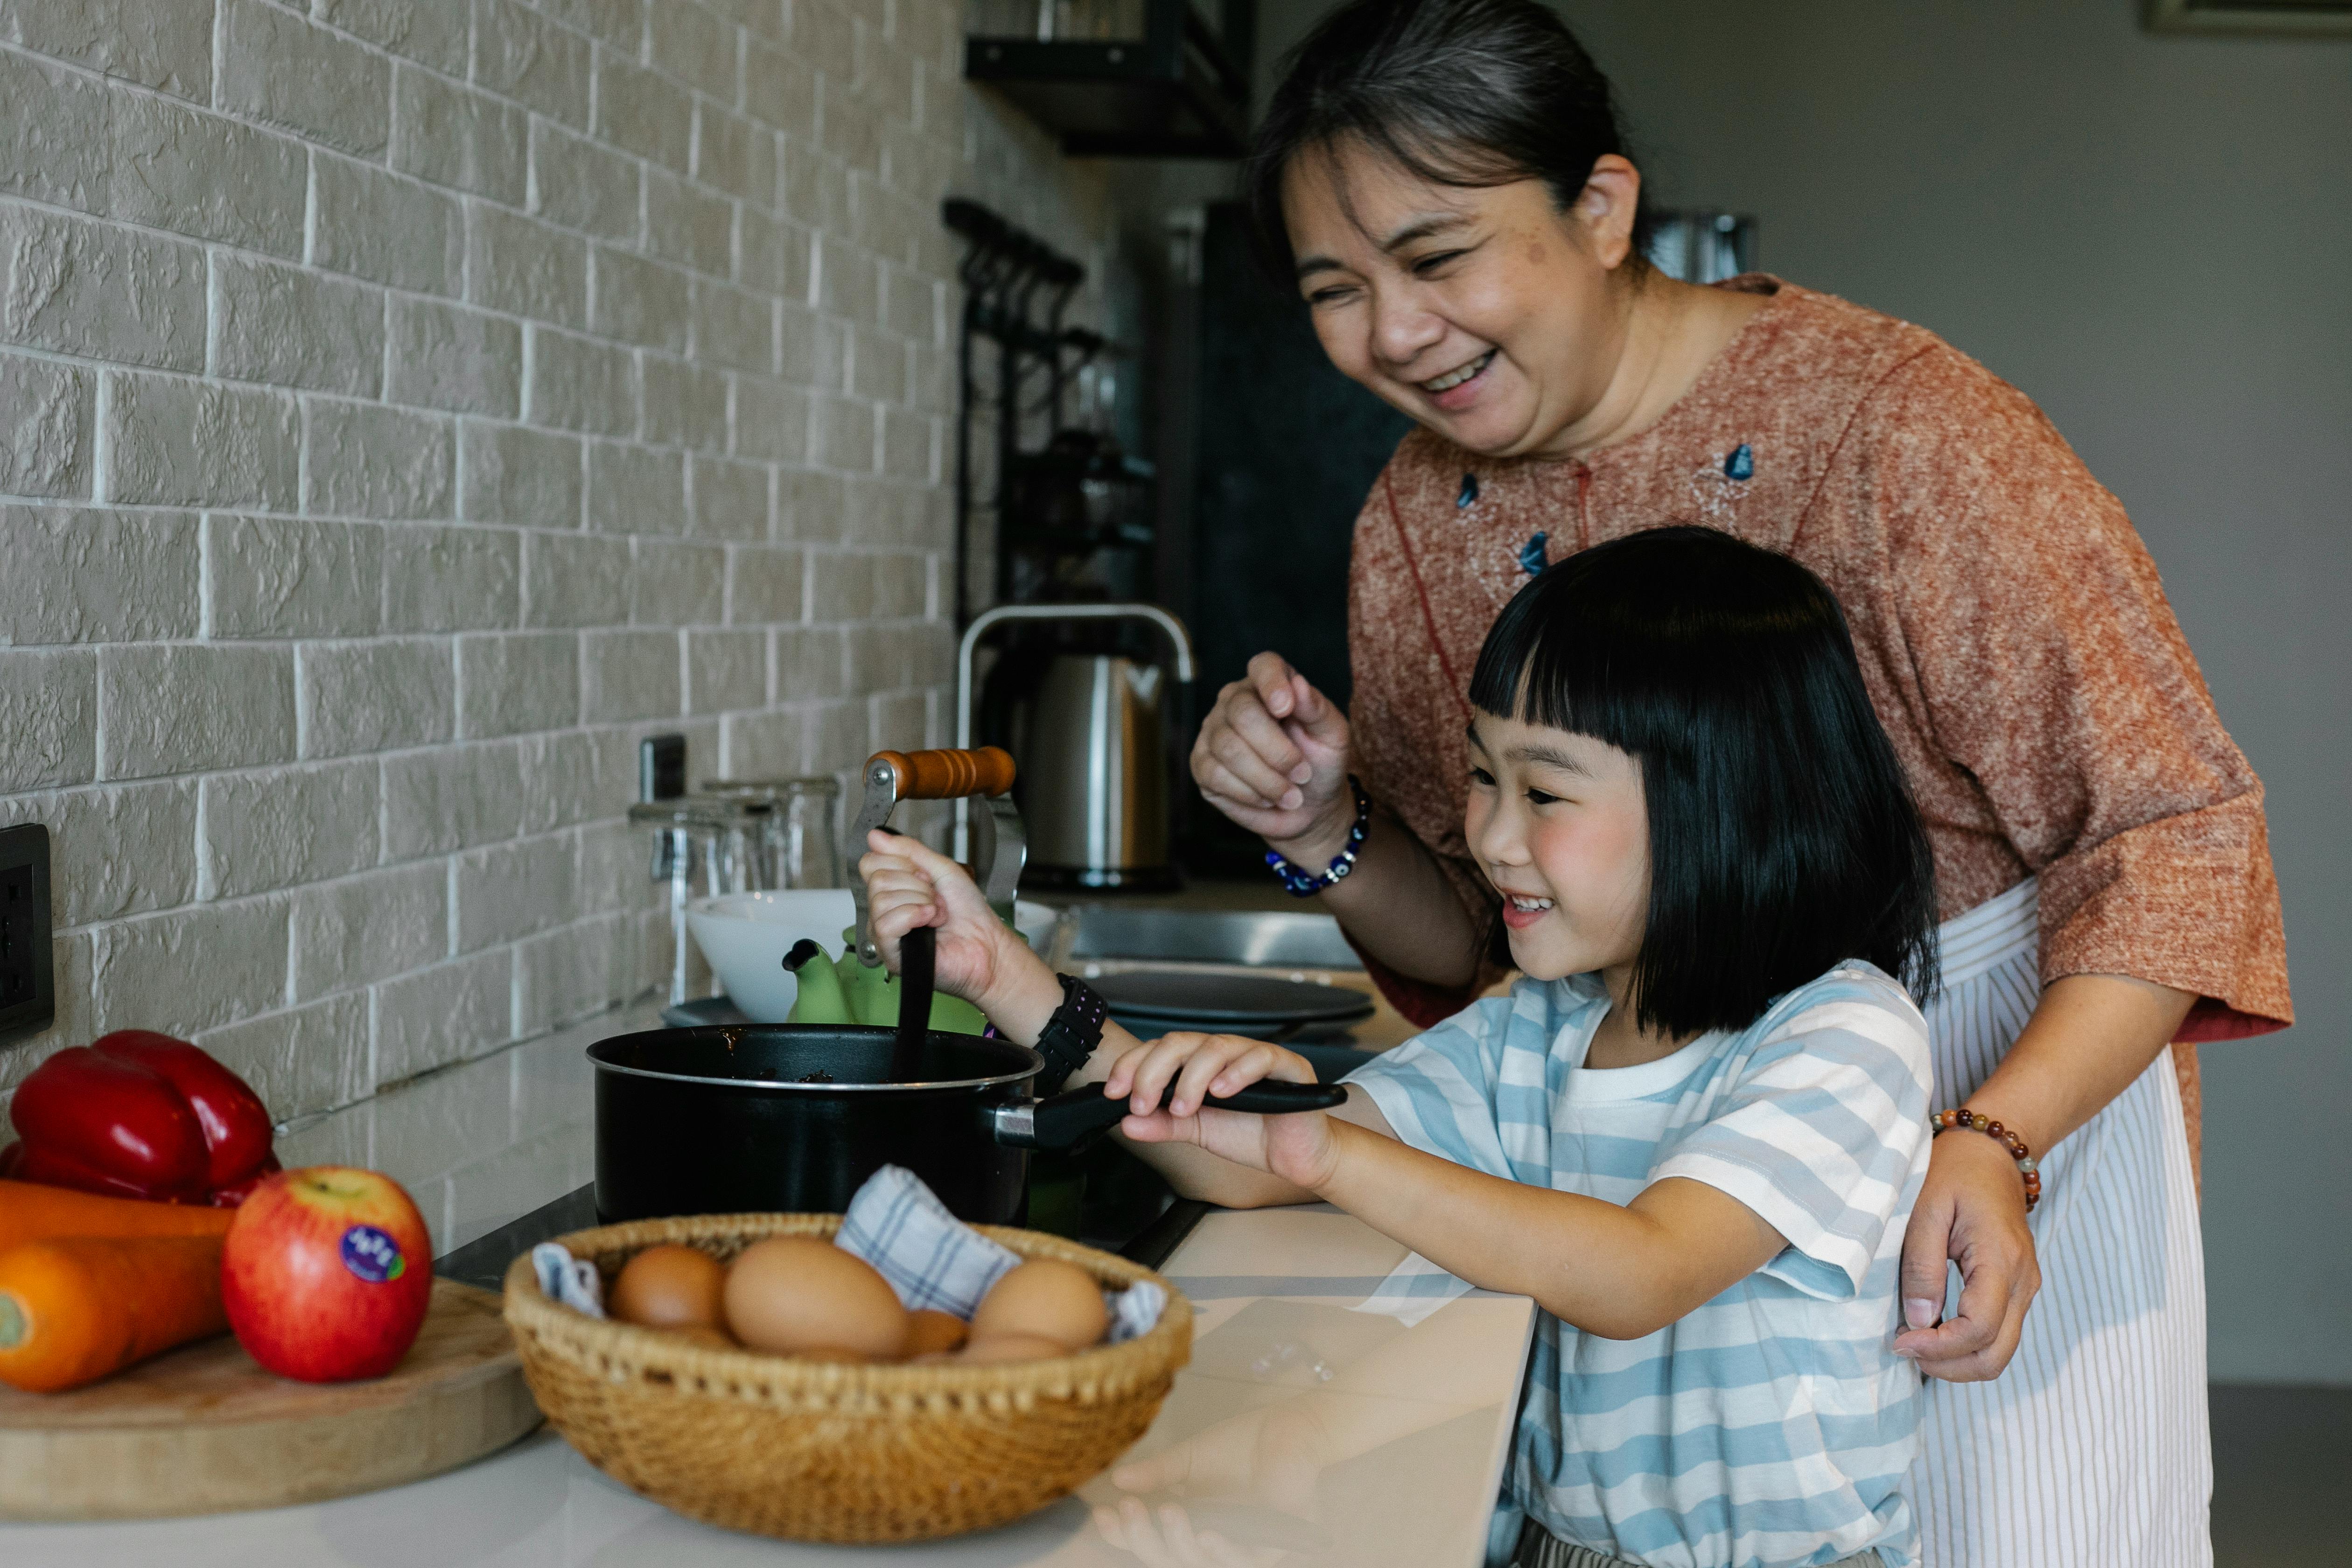 Children in the kitchen: the COVID-19 effect